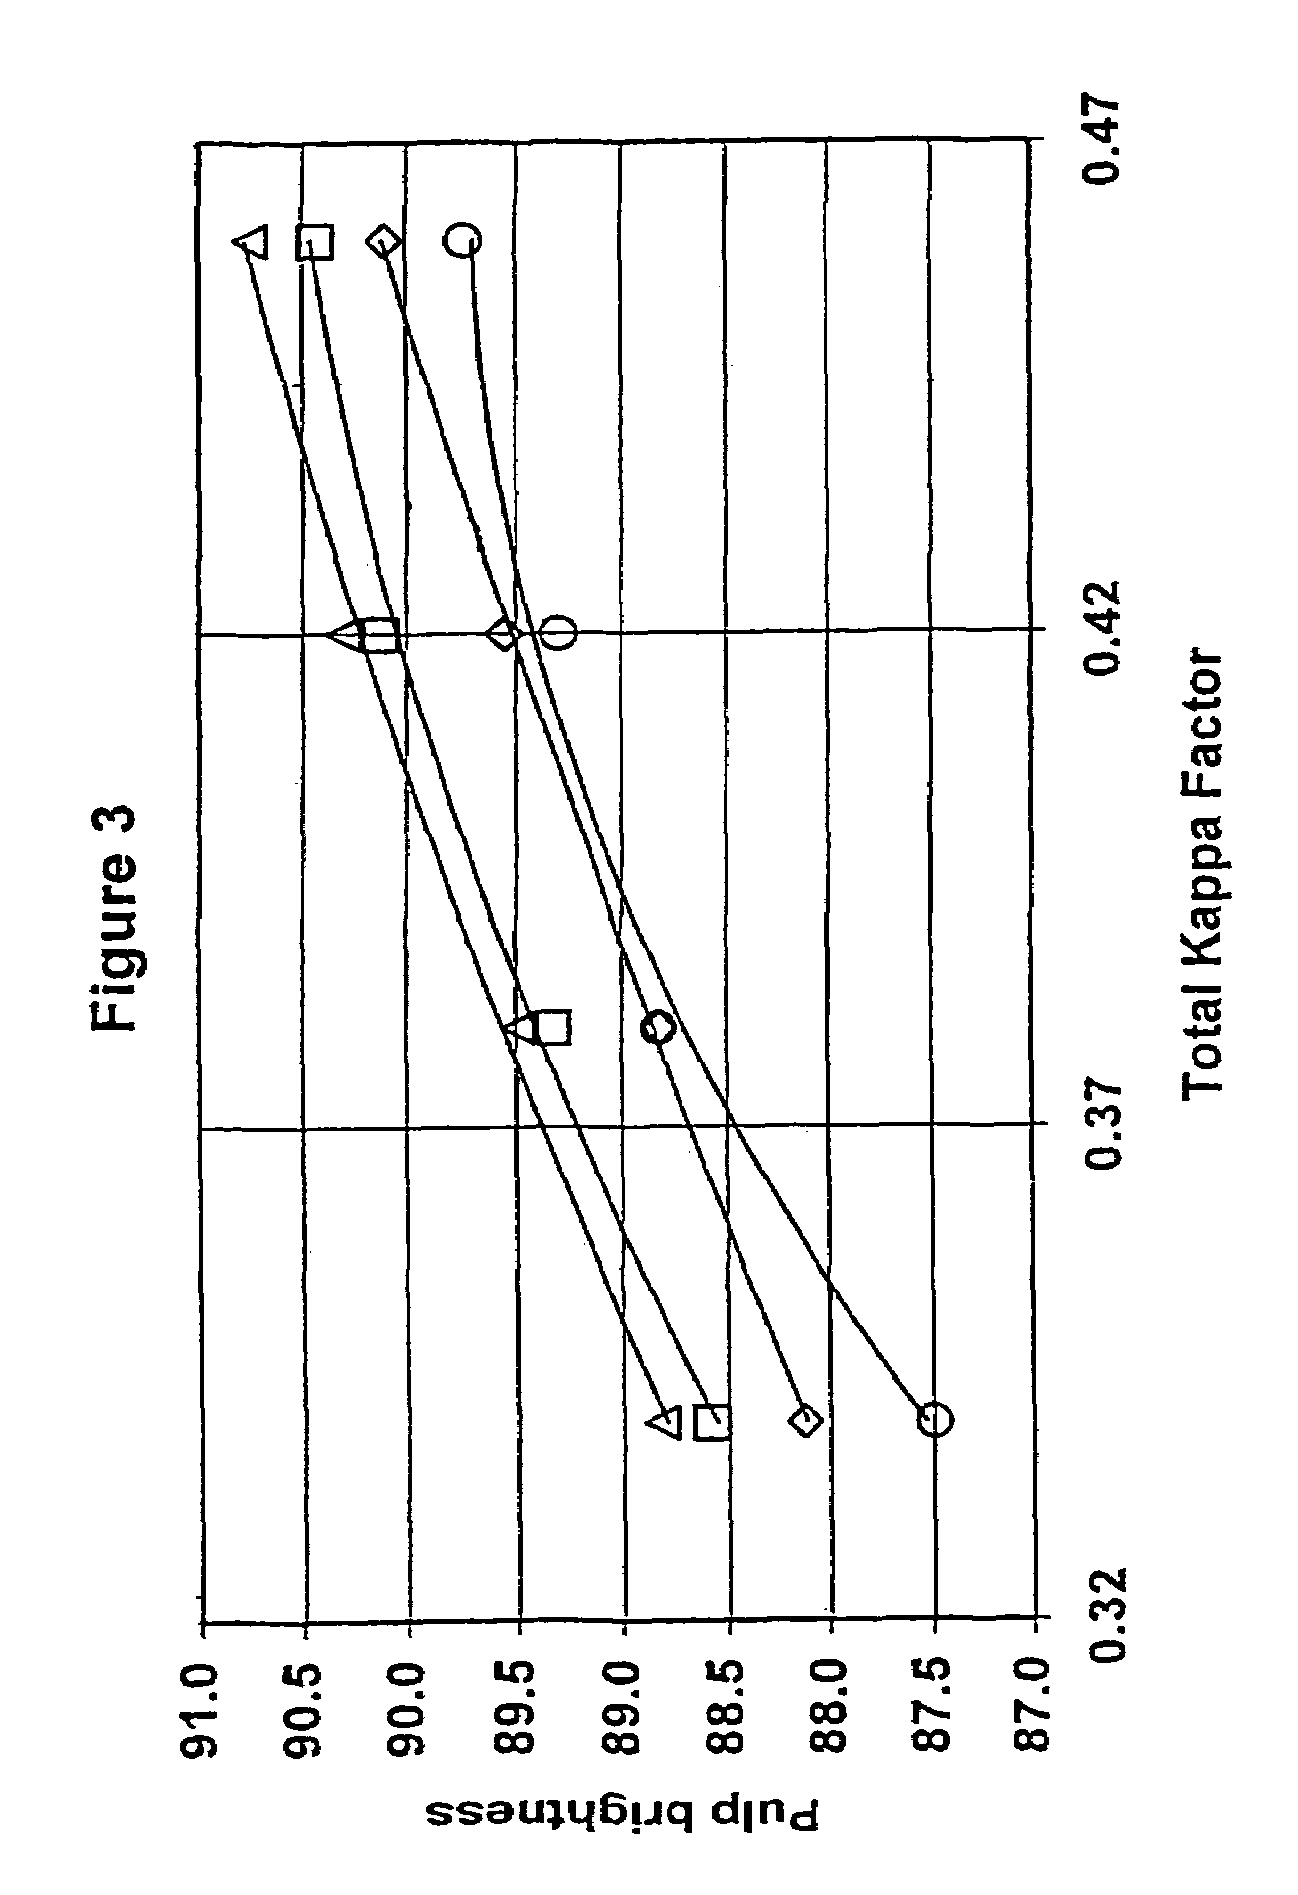 Method of xylanase treatment in a chlorine dioxide bleaching sequence